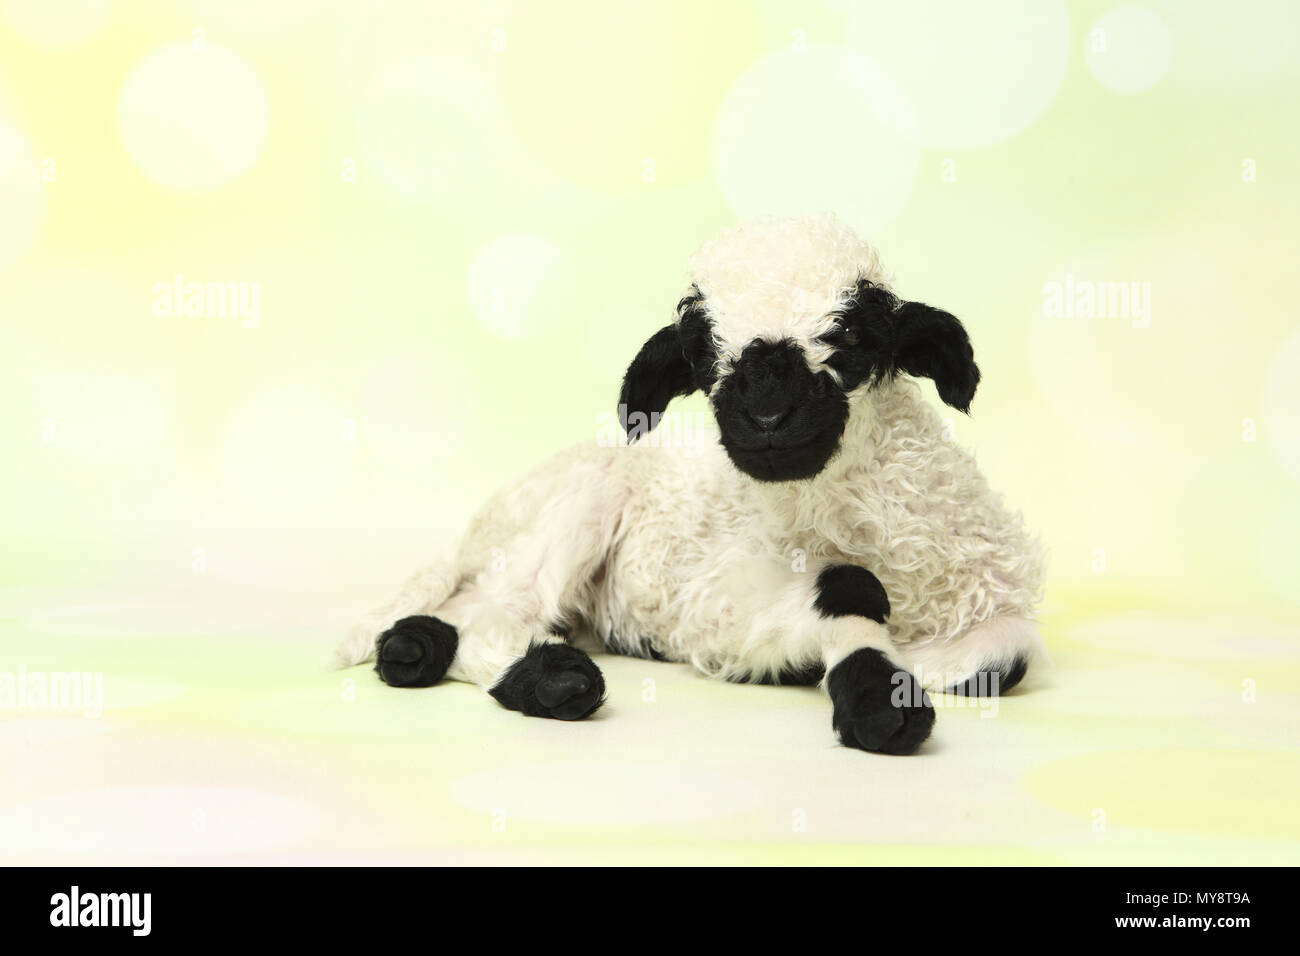 Valais Blacknose Sheep. Lamb (10 days old) lying. Studio picture against a light-green background. Germany Stock Photo